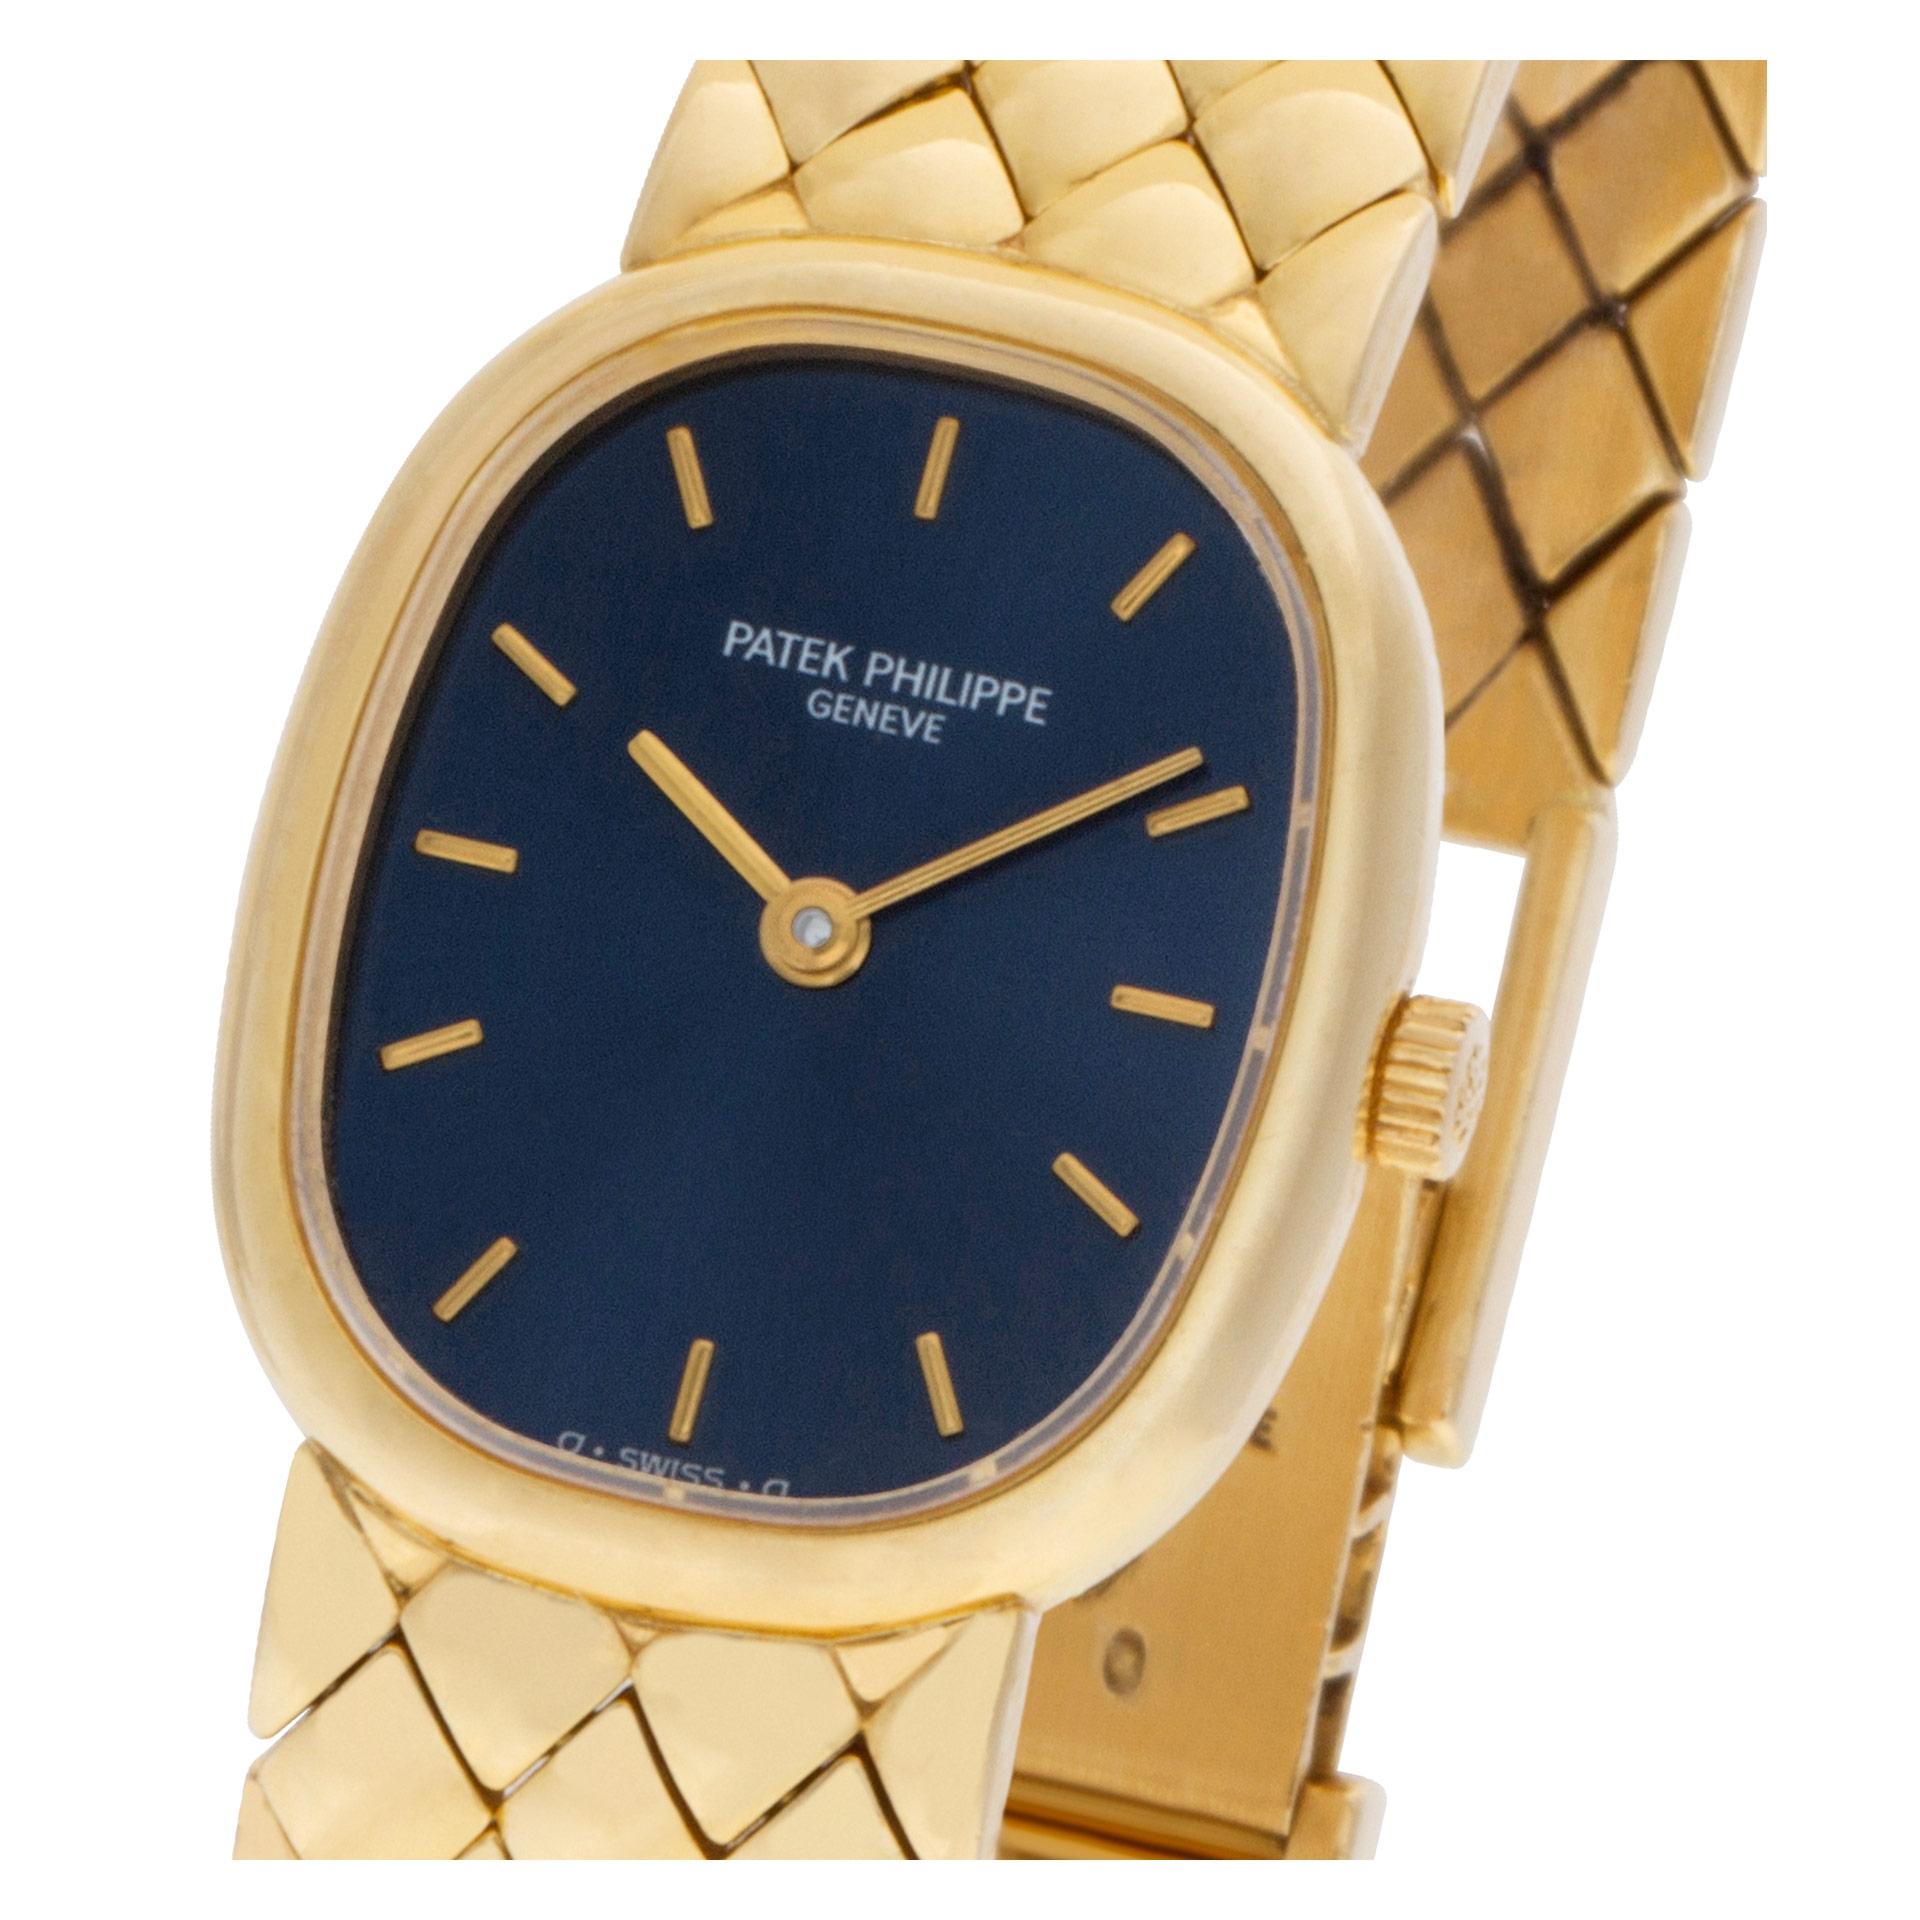  ESTIMATED RETAIL: $14,900     YOUR PRICE: $10,925.00

Ladies Patek Philippe Ellipse blue sunburst dial in 18k yellow gold. Quartz. 19.5 mm case size. With Patek Philippe papers. It will fit up to a 6